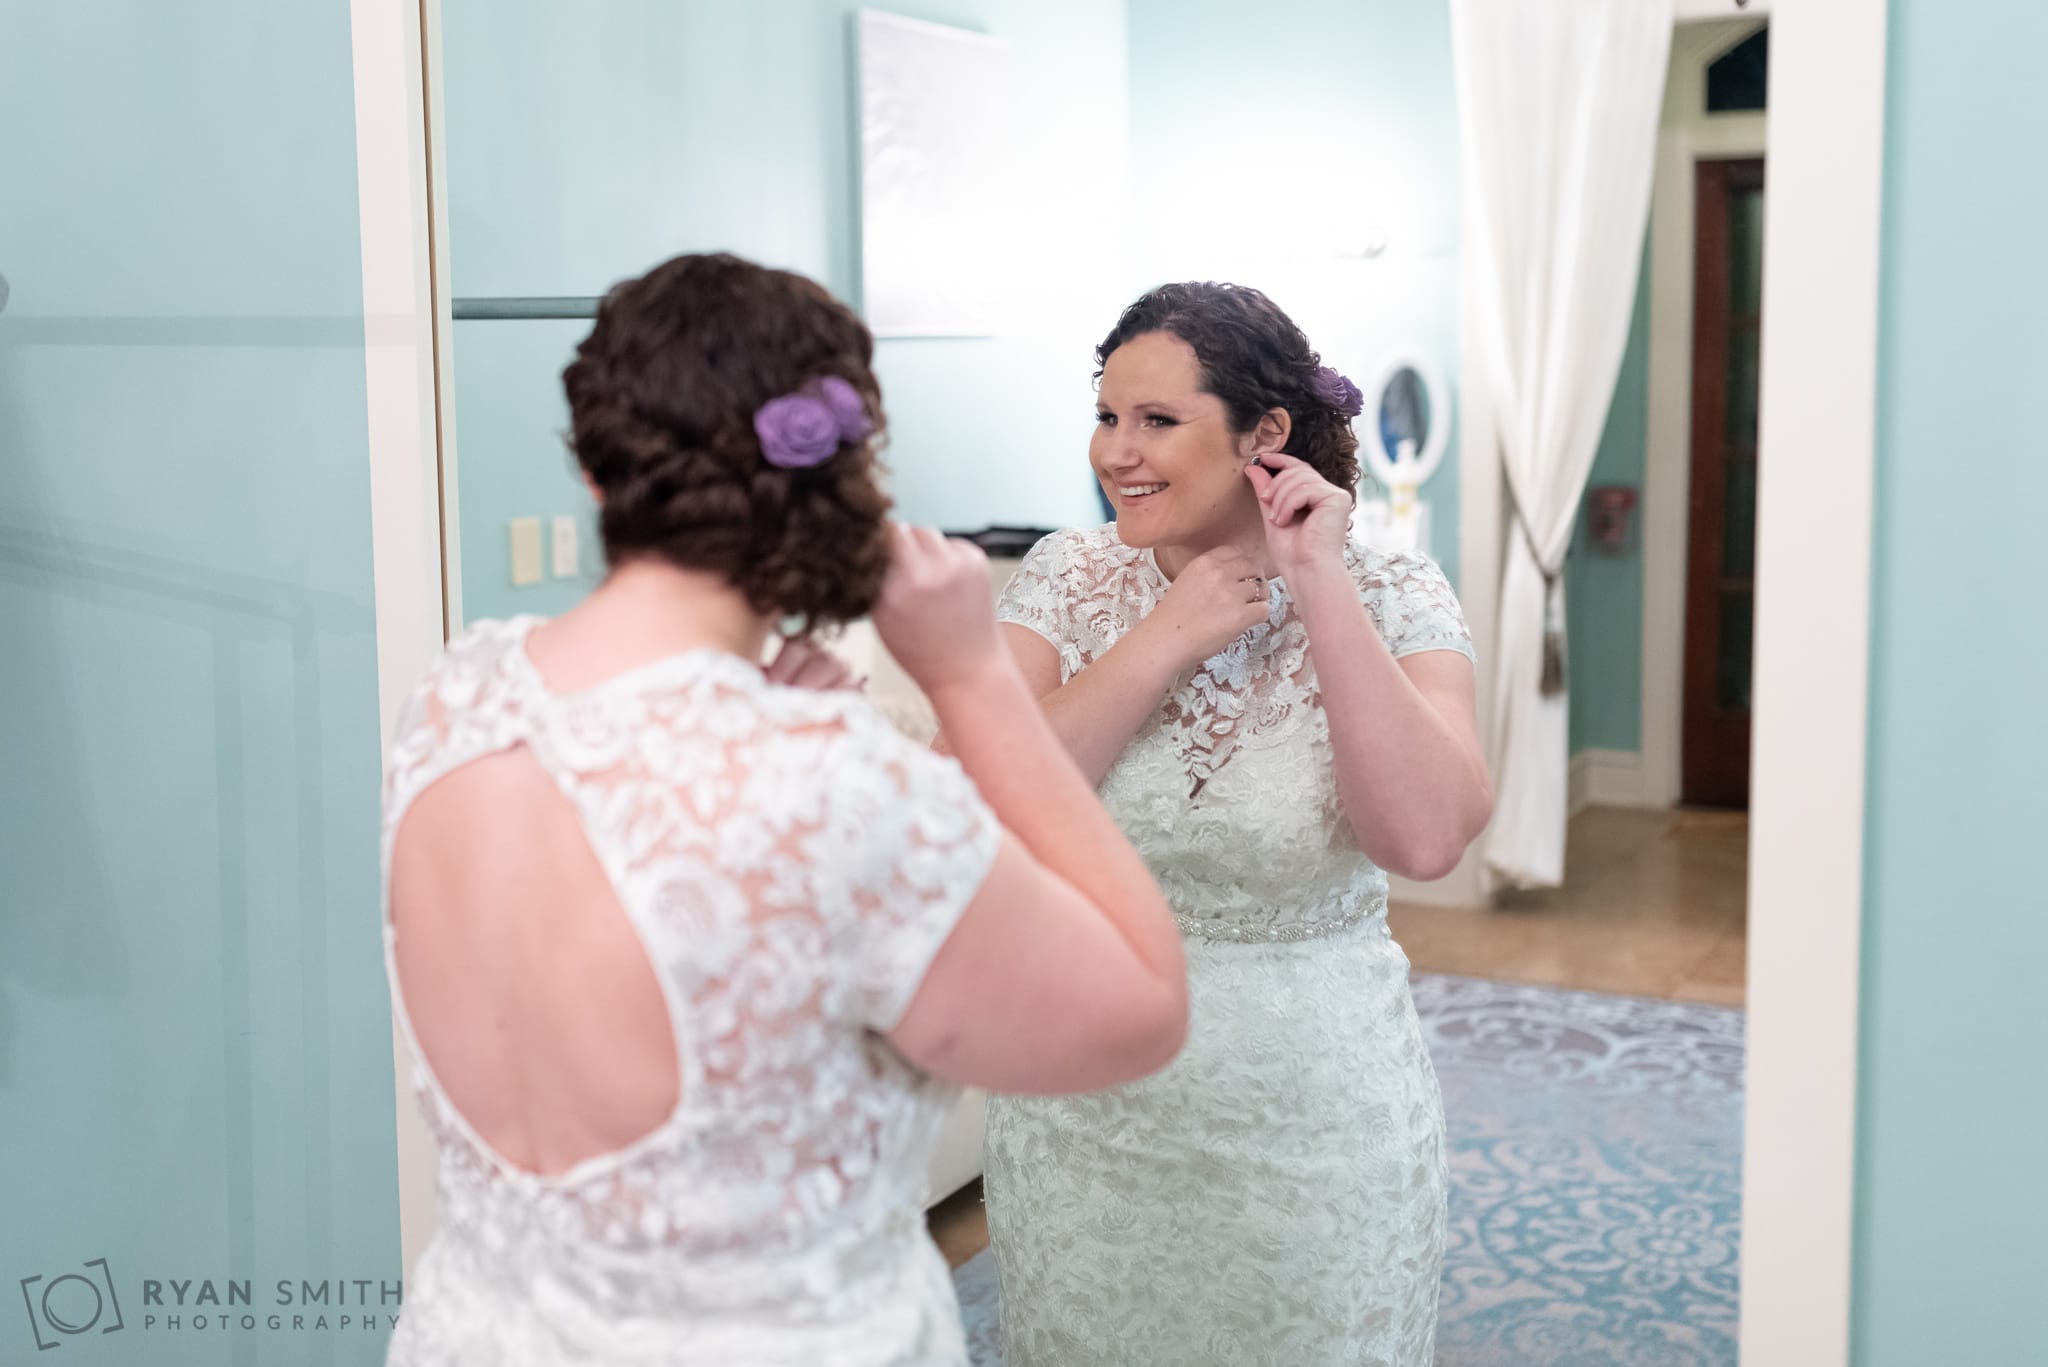 Bride putting on earrings in the mirror  - 21 Main Events